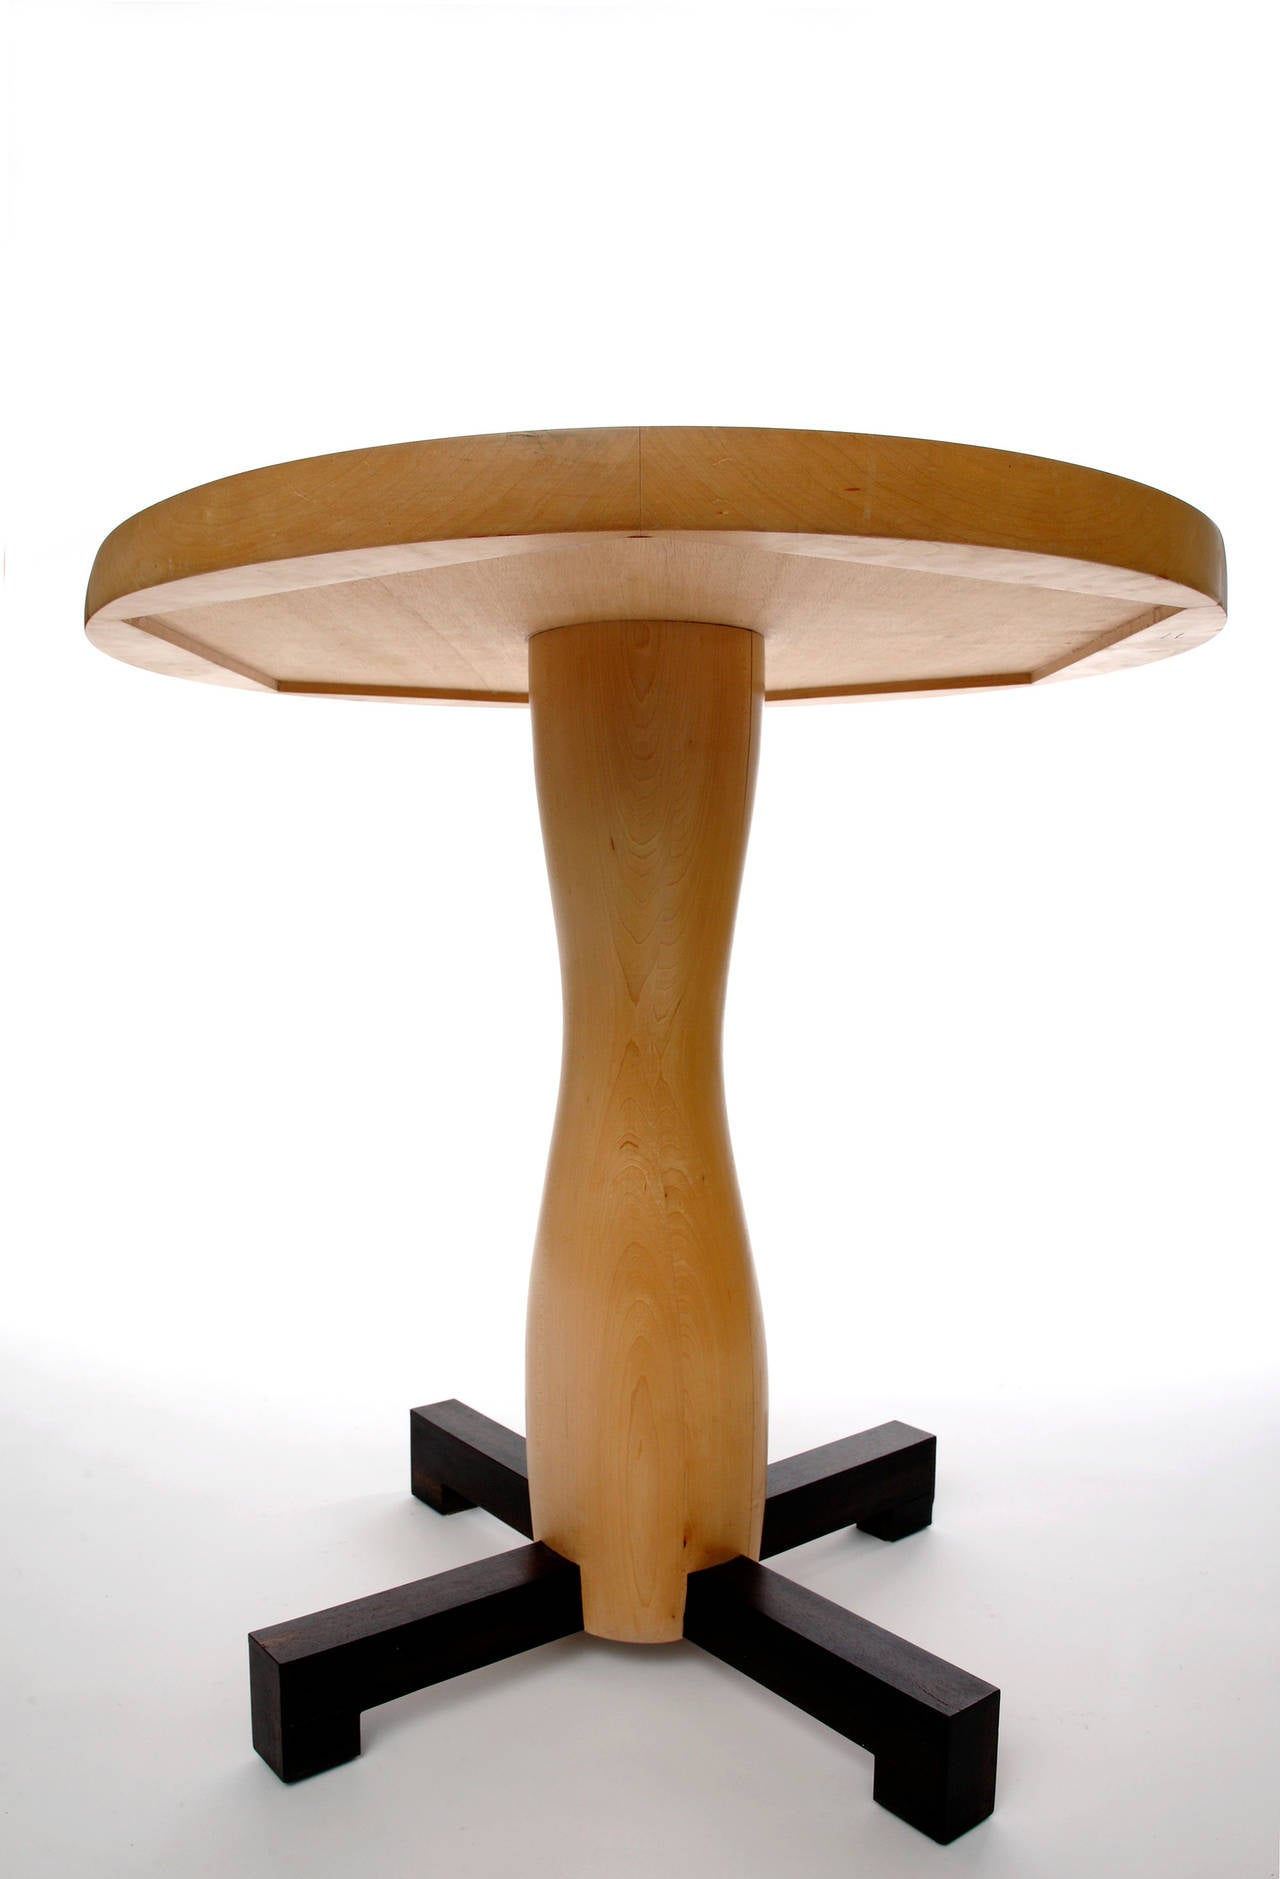 Sycamore Unique Gueridon Round Table by Jacques Jarrige, 2006